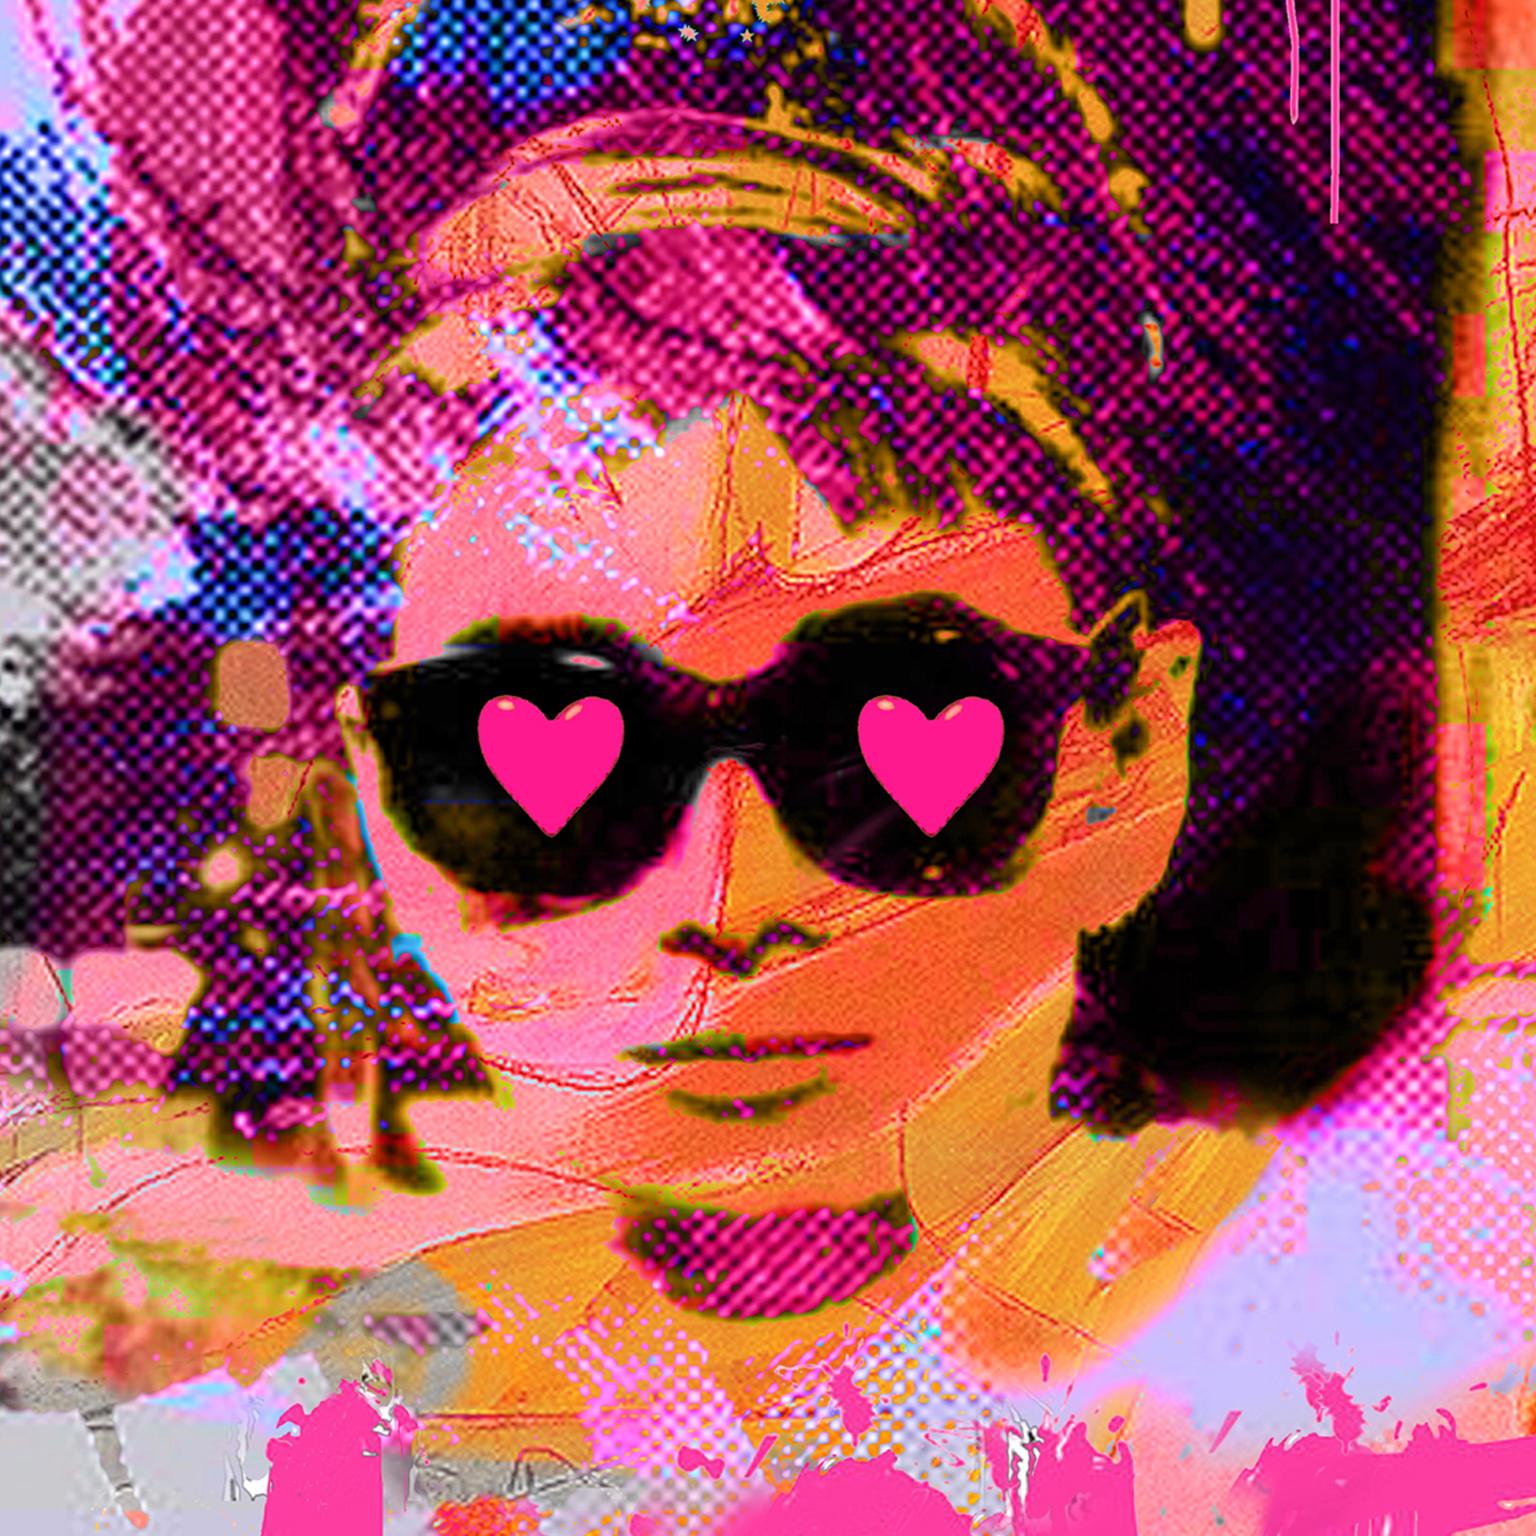 All About Love – Audrey - Painting by Dganit Blechner